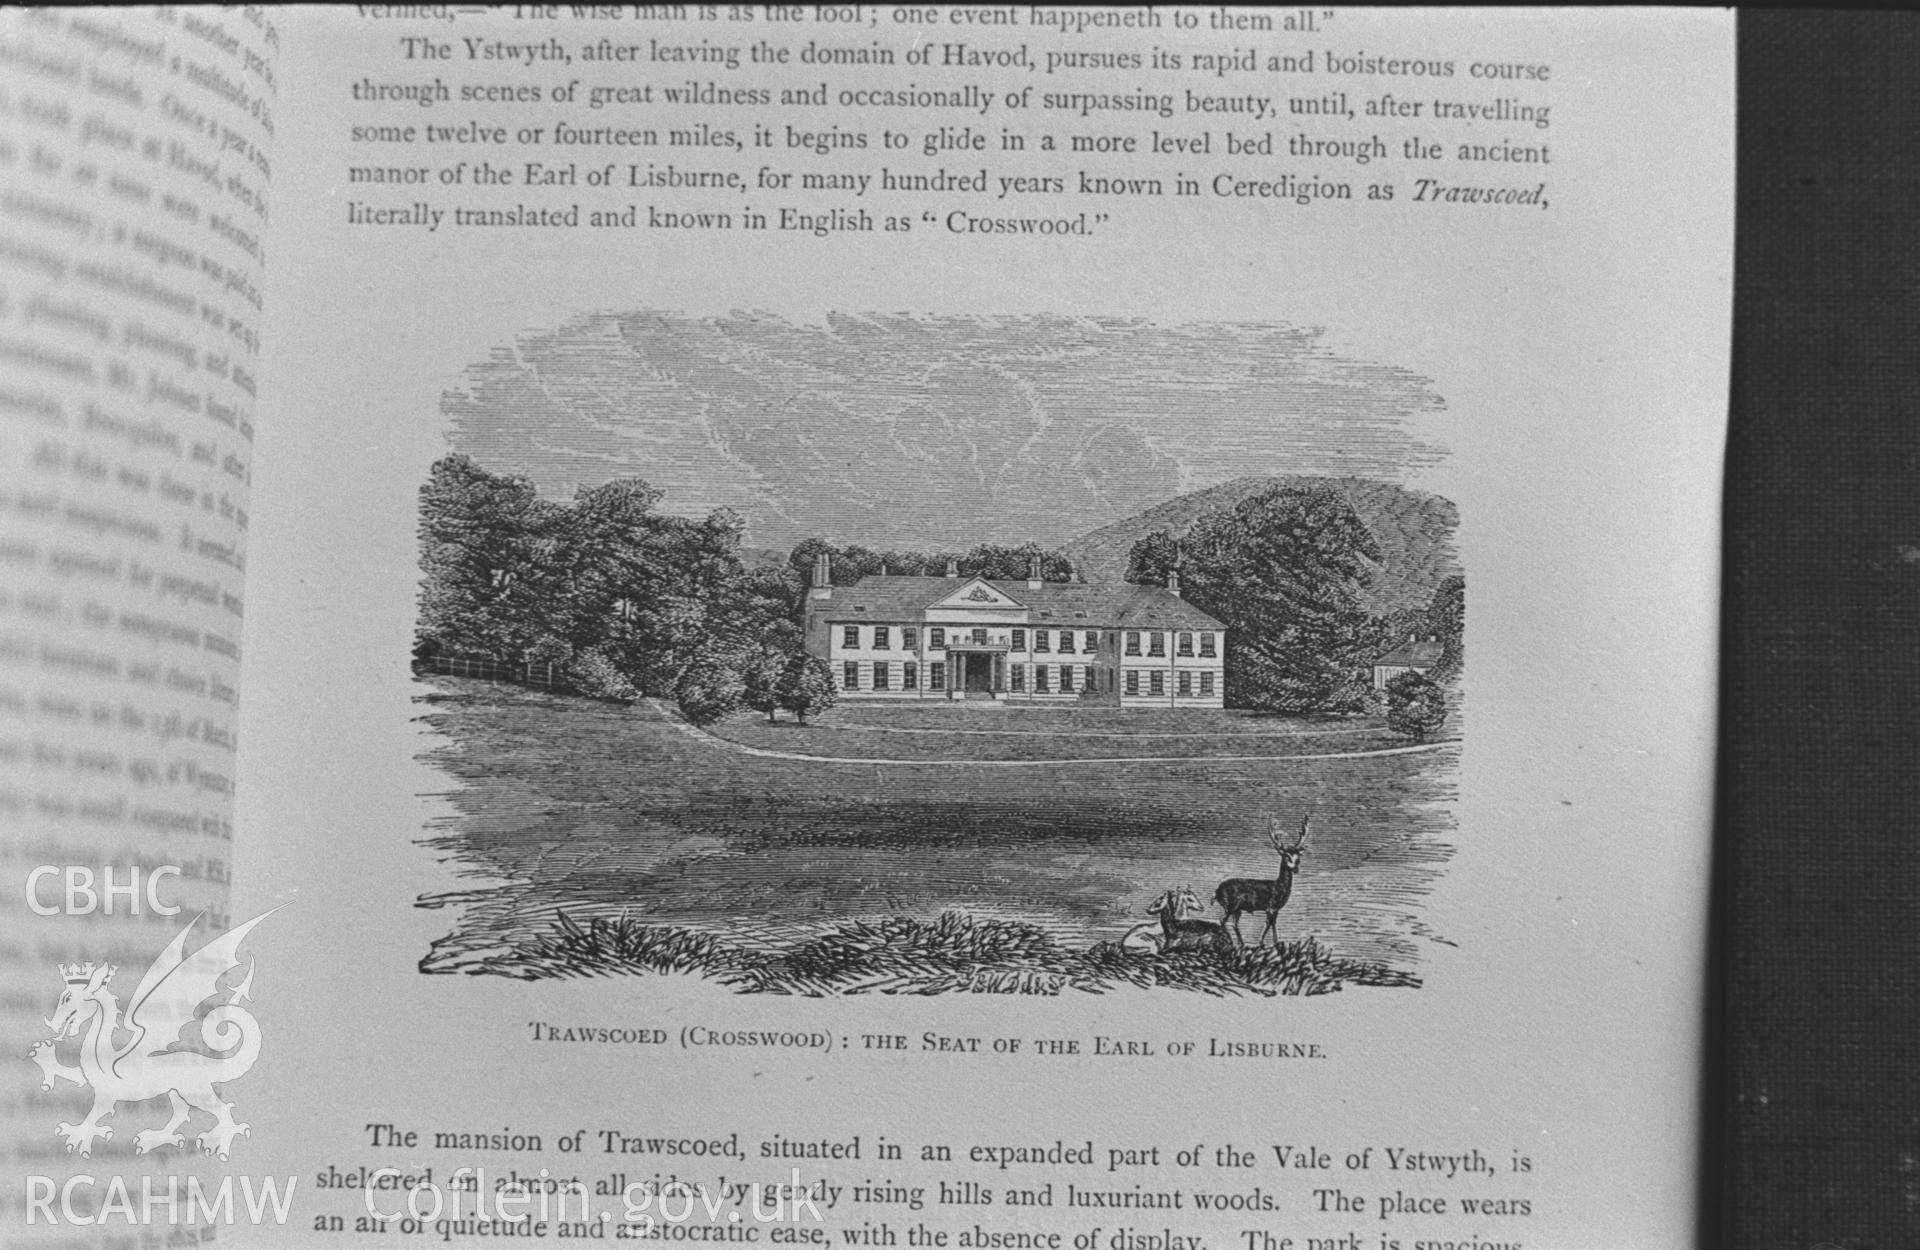 Drawing entitled 'Trawscoed (Crosswood): The seat of the Earl of Lisburne.' From 'Annals of the counties and county families of Wales' vol 1 by Thomas Nicholas, 1872. Photographed by Arthur O. Chater in January 1968 for his own private research.